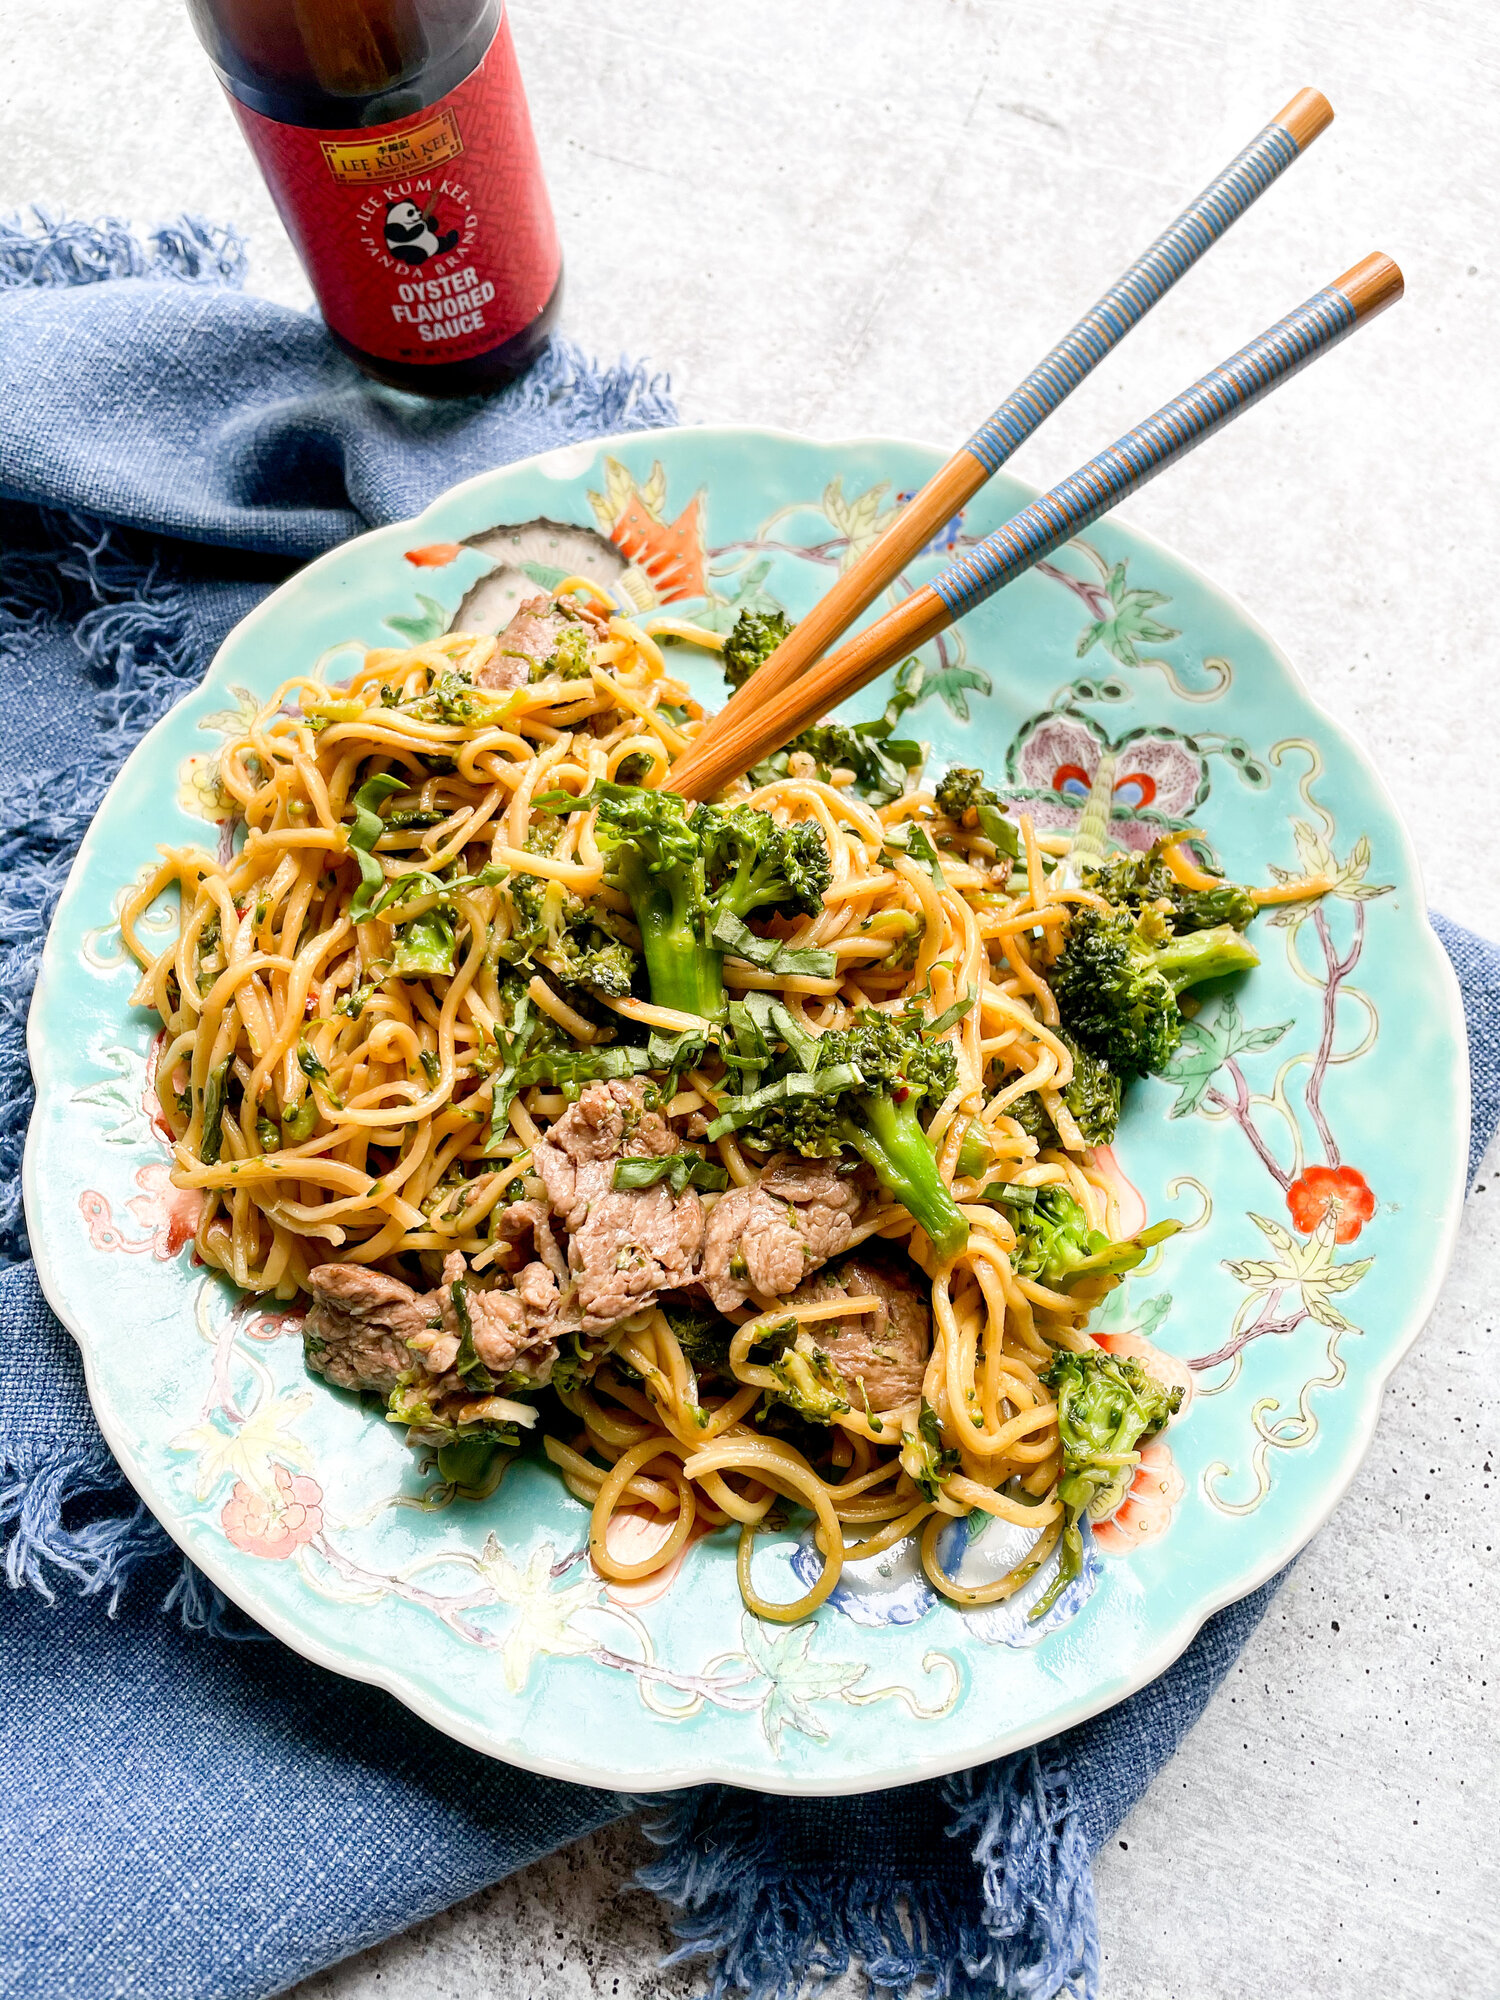 Stir fries are my go-to quick and easy meal. You just throw together some veggies, maybe some meat, either rice or noodles, and most importantly.. an insane sauce. I always have a full roster of [Lee Kum Kee](https://usa.lkk.com/) sauces, such as their [Panda Brand Oyster Sauce](https://usa.lkk.com/en/products/panda-brand-oyster-flavored-sauce), in my pantry, ready for action as a marinade, dip, or to help create a stir fry sauce. Oyster sauce adds an unexpected salty, sweet, bold flavor to this noodle dish that you just can’t get from anything else. Mix it up with a few other pantry staples, stir it in with some noodles and steak and you have an absolutely delicious, veggie and protein packed meal in under 20 minutes. Feel free to add more vegetables! Swap in thinly sliced chicken! Or shrimp! Use absolutely any skinny long noodle. Do your thing, make it work using what you already have in your pantry… but don’t skip the oyster sauce!